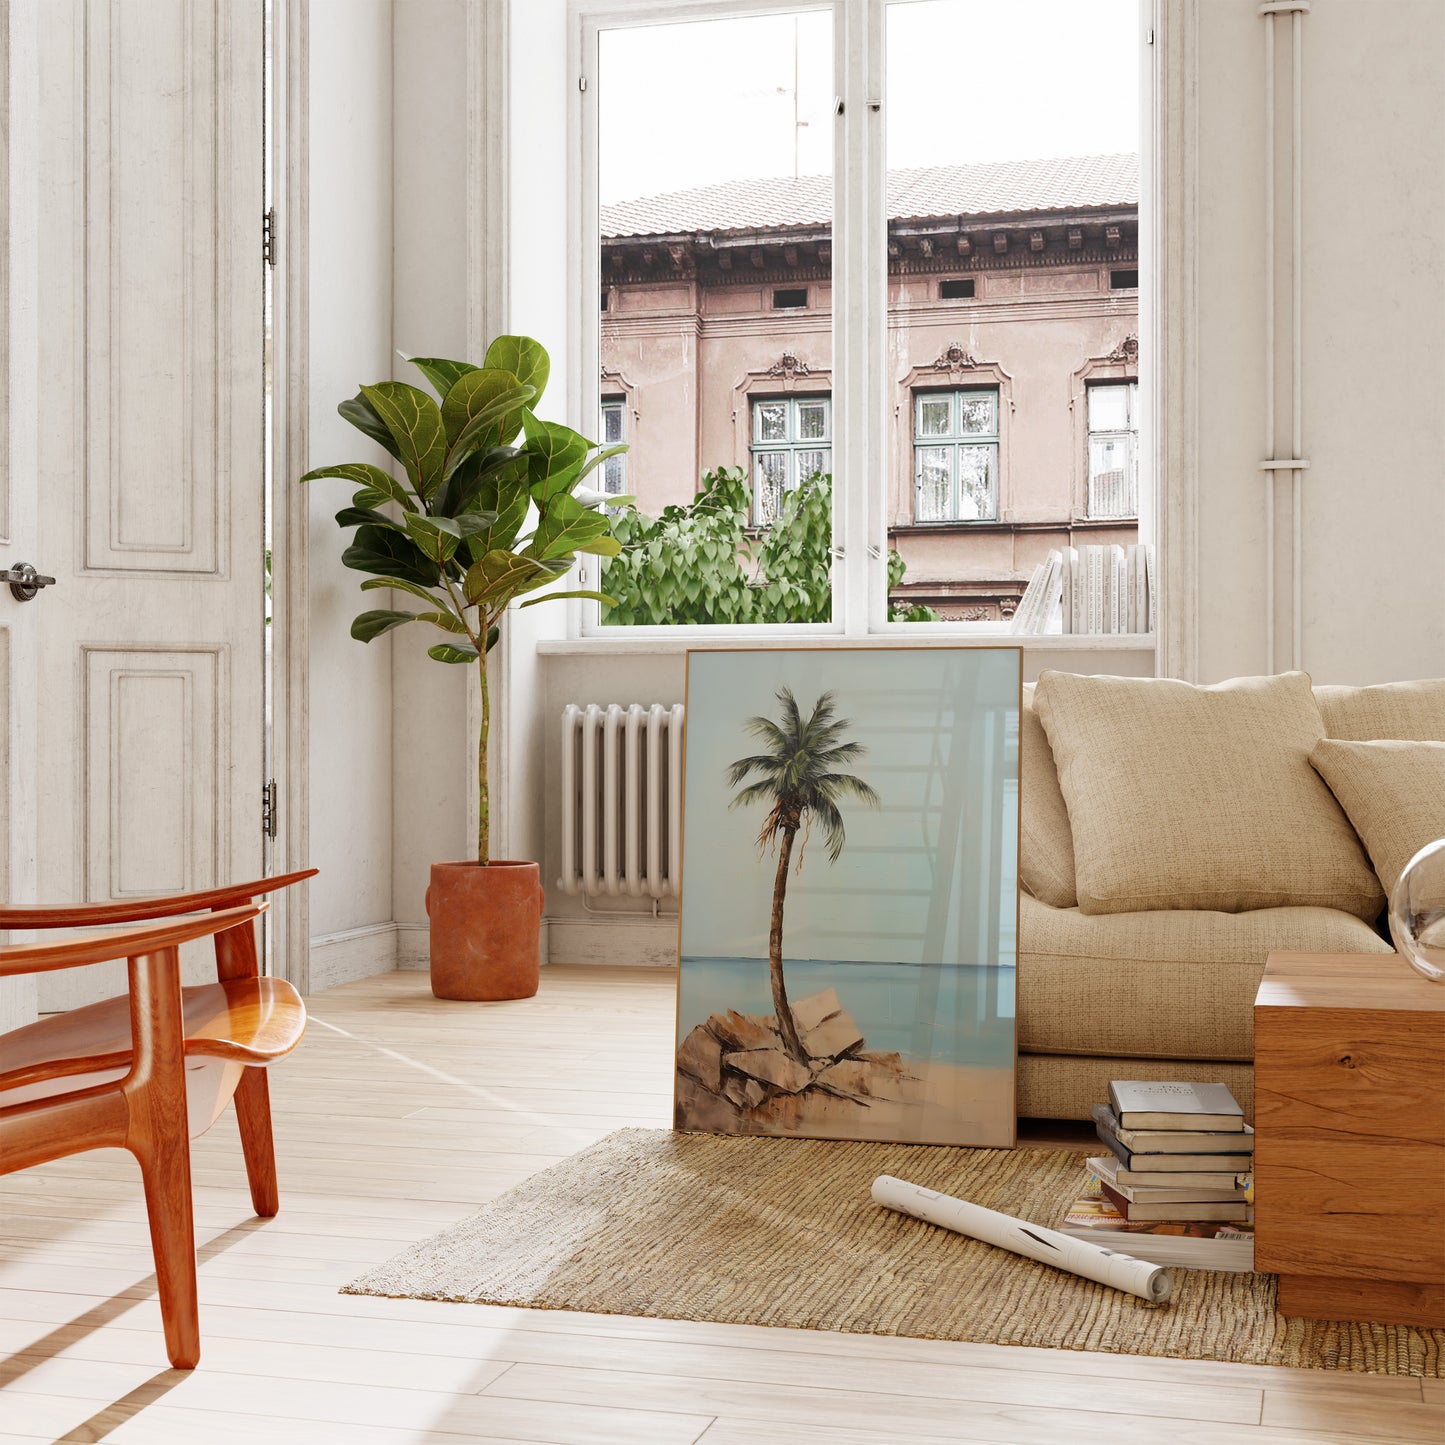 A cozy living room with a couch, plants, and a framed palm tree picture.